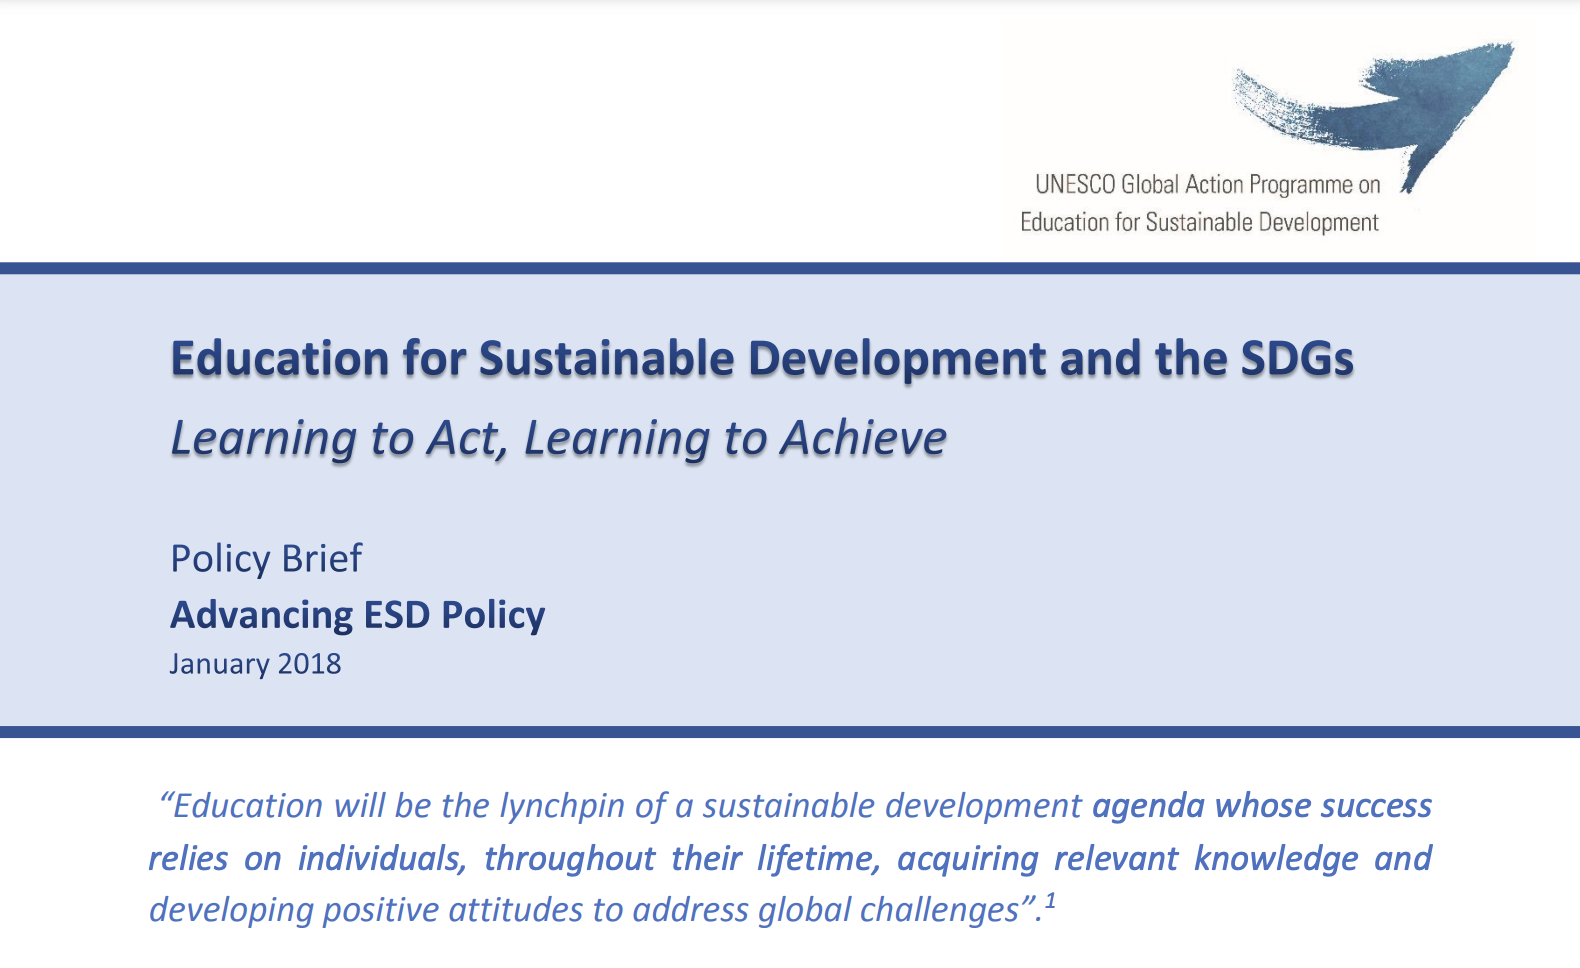 Education for Sustainable Development and the SDGs, Learning to Act, Learning to Achieve